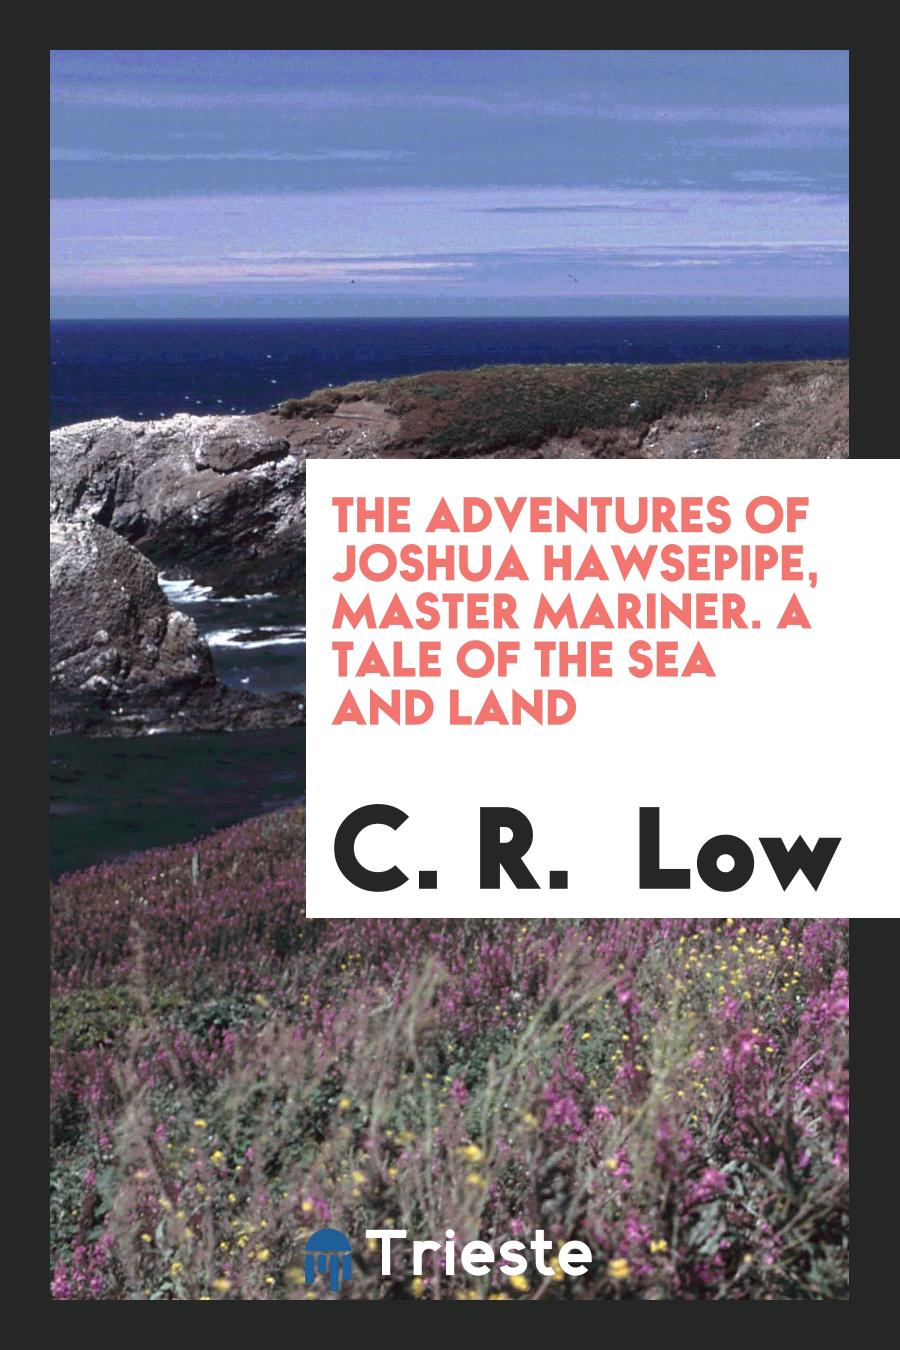 The Adventures of Joshua Hawsepipe, Master Mariner. A Tale of the Sea and Land